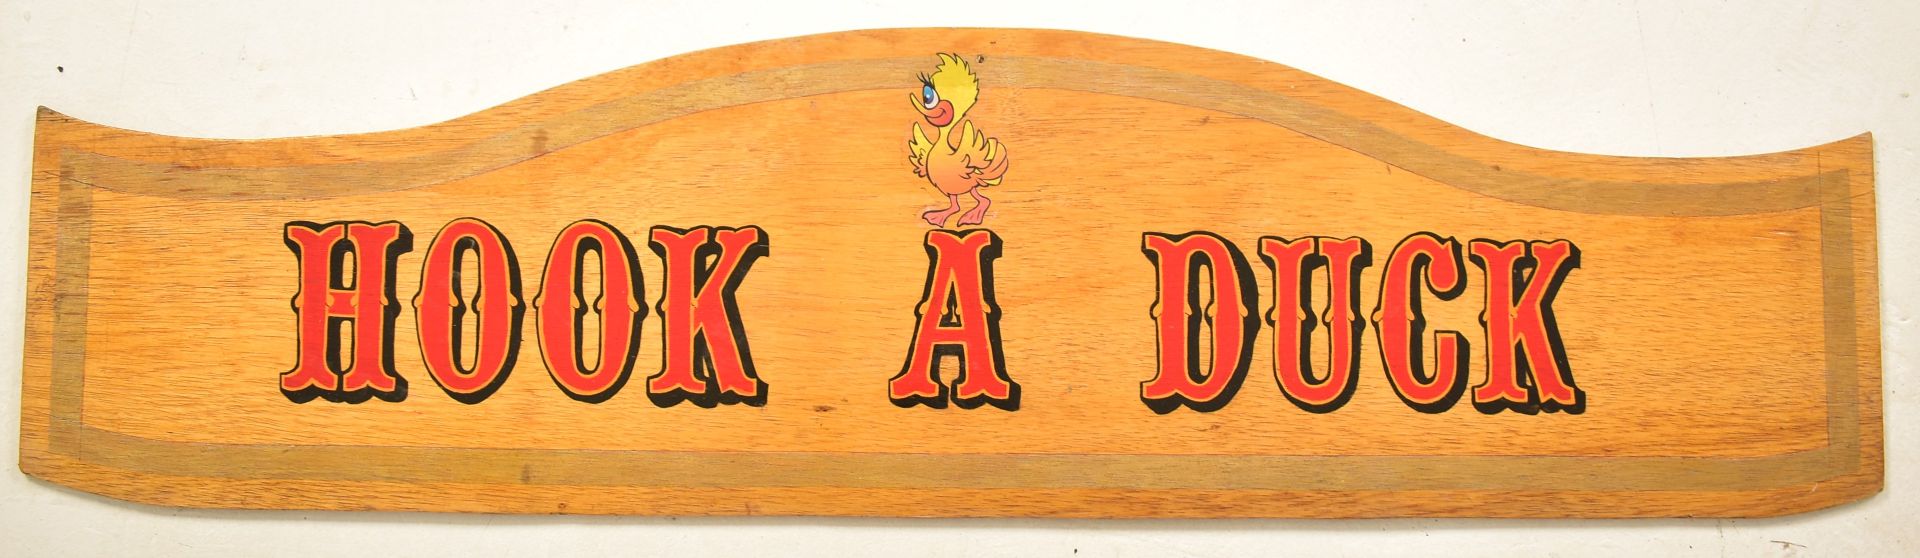 HOOK A DUCK - 20TH CENTURY FAIRGROUND PAINTED SIGN